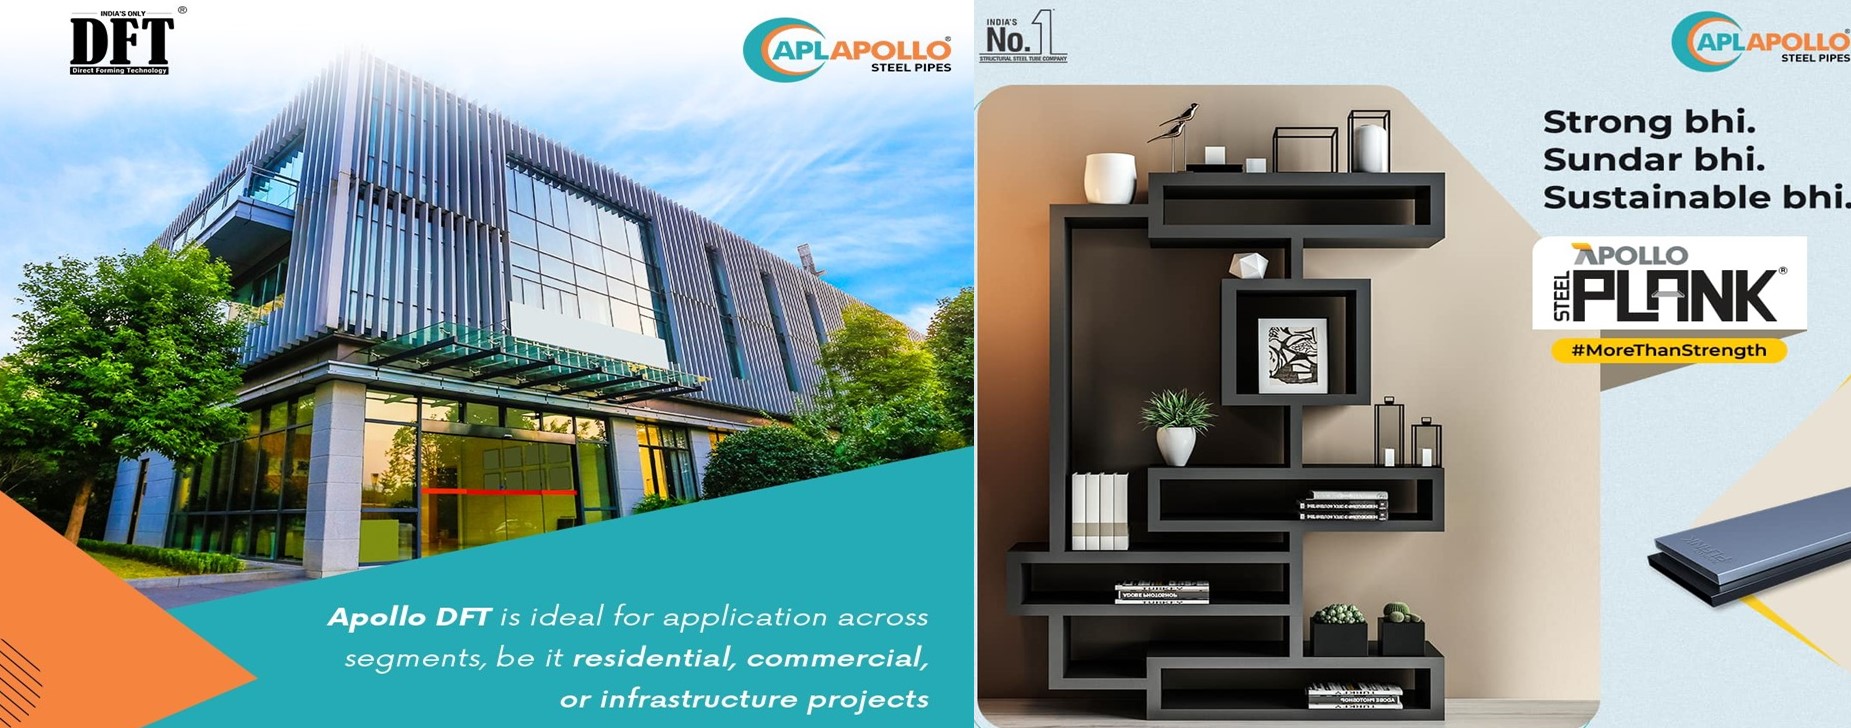 APL Apollo Tubes – The Structural Steel Disruptor Revolutionizing the Growth in 2023 & Beyond